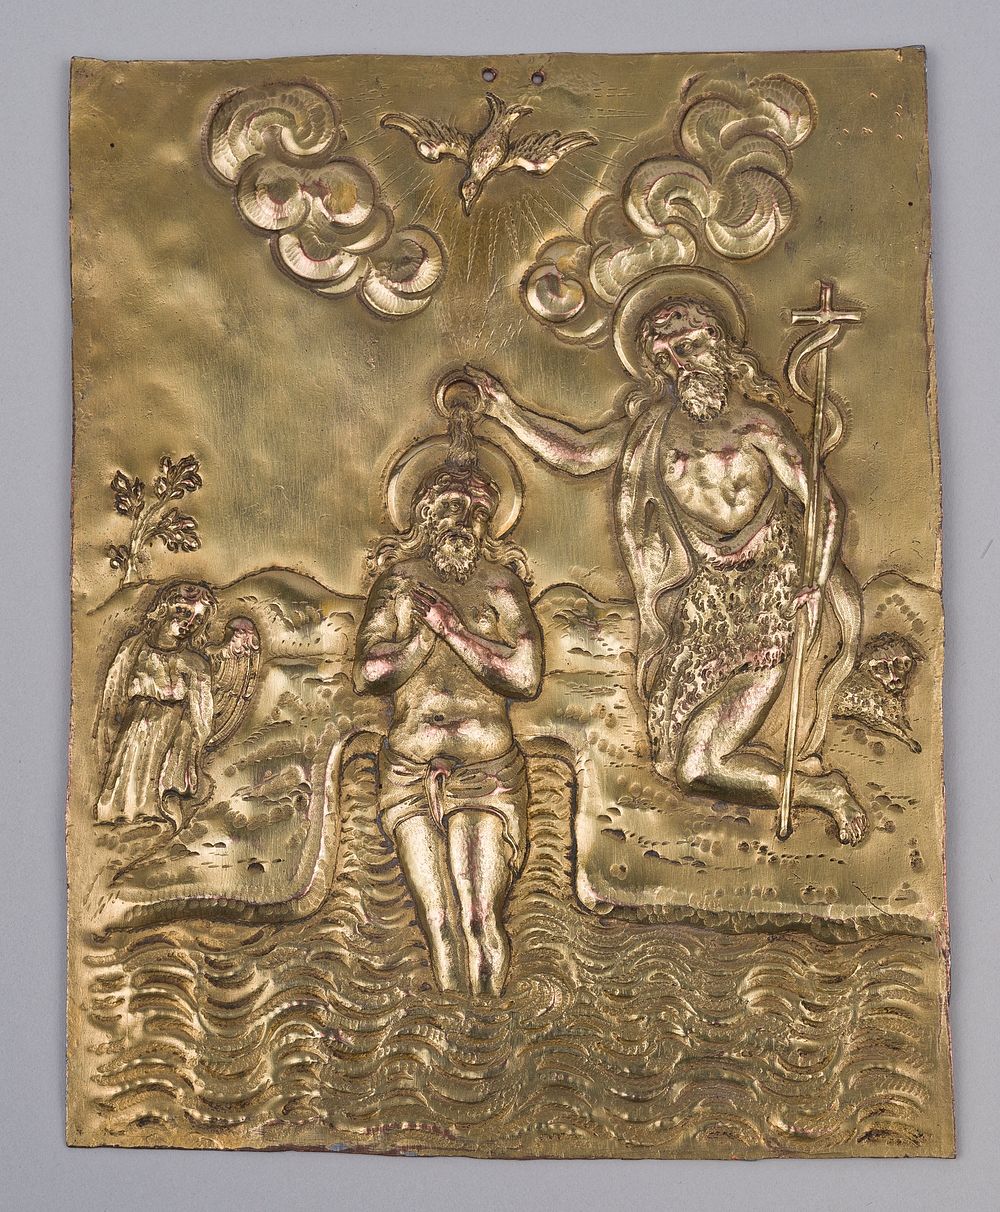 Baptism of Christ by Unidentified artist